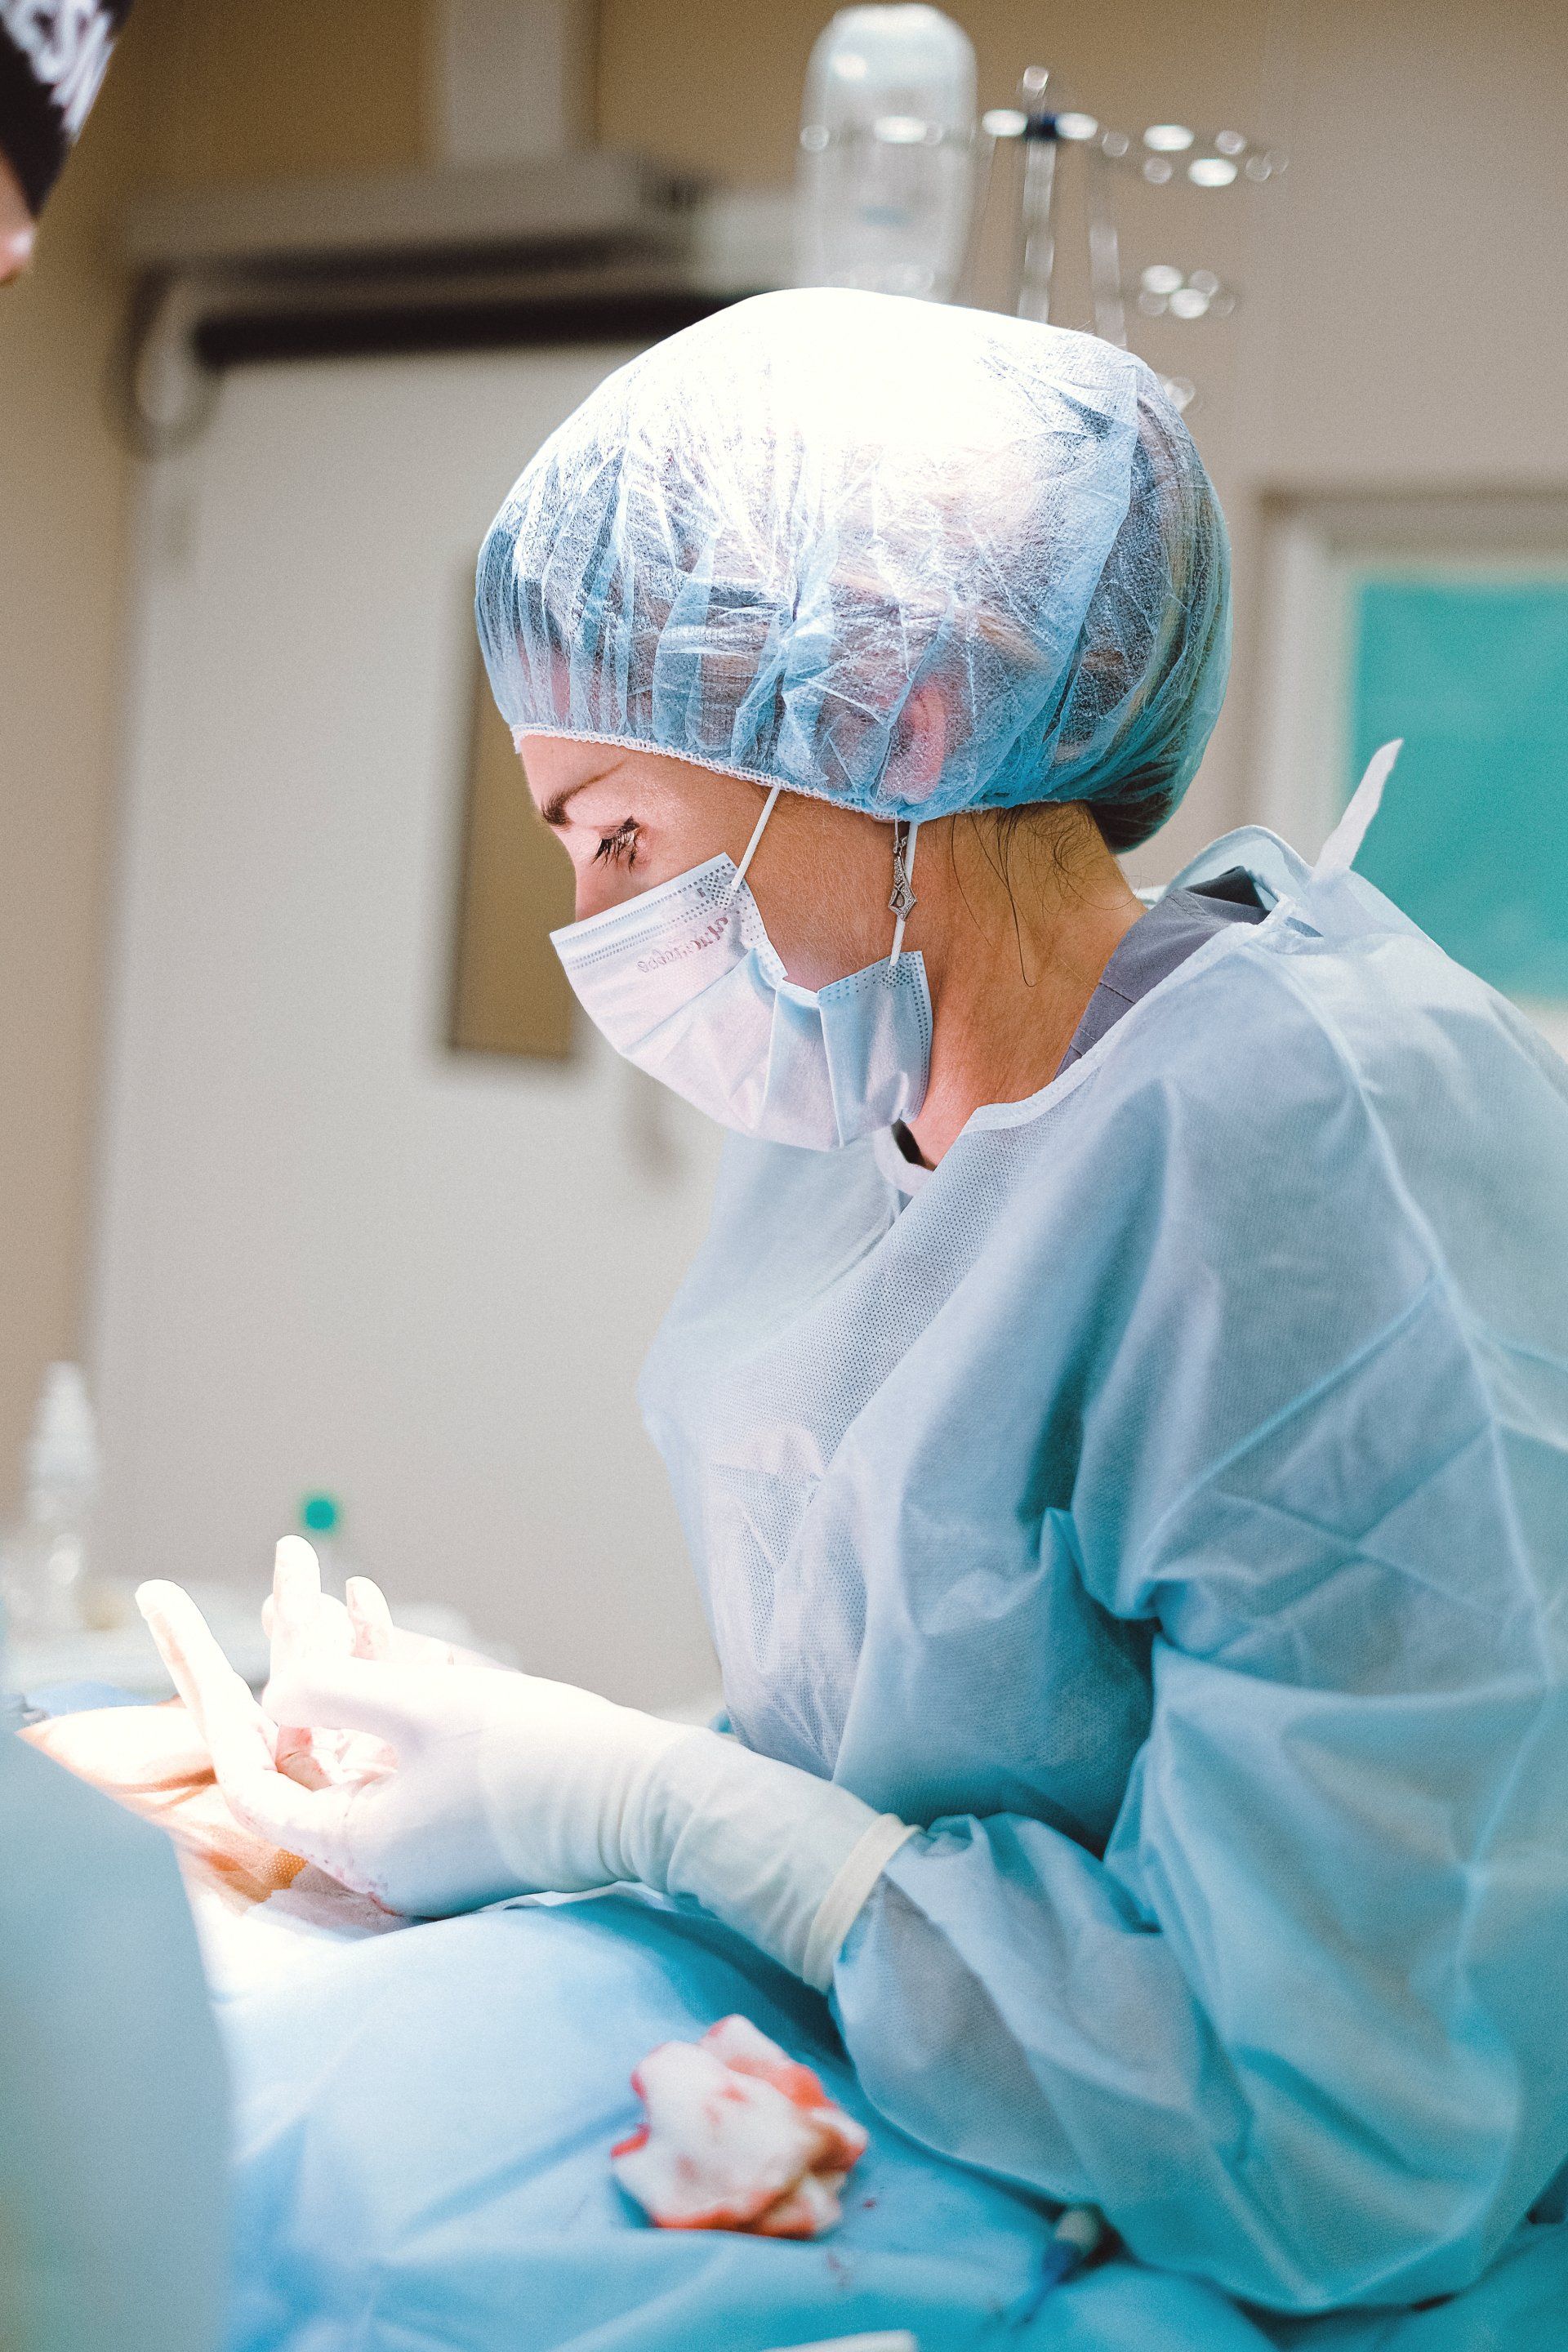 A picture of a surgeon at work